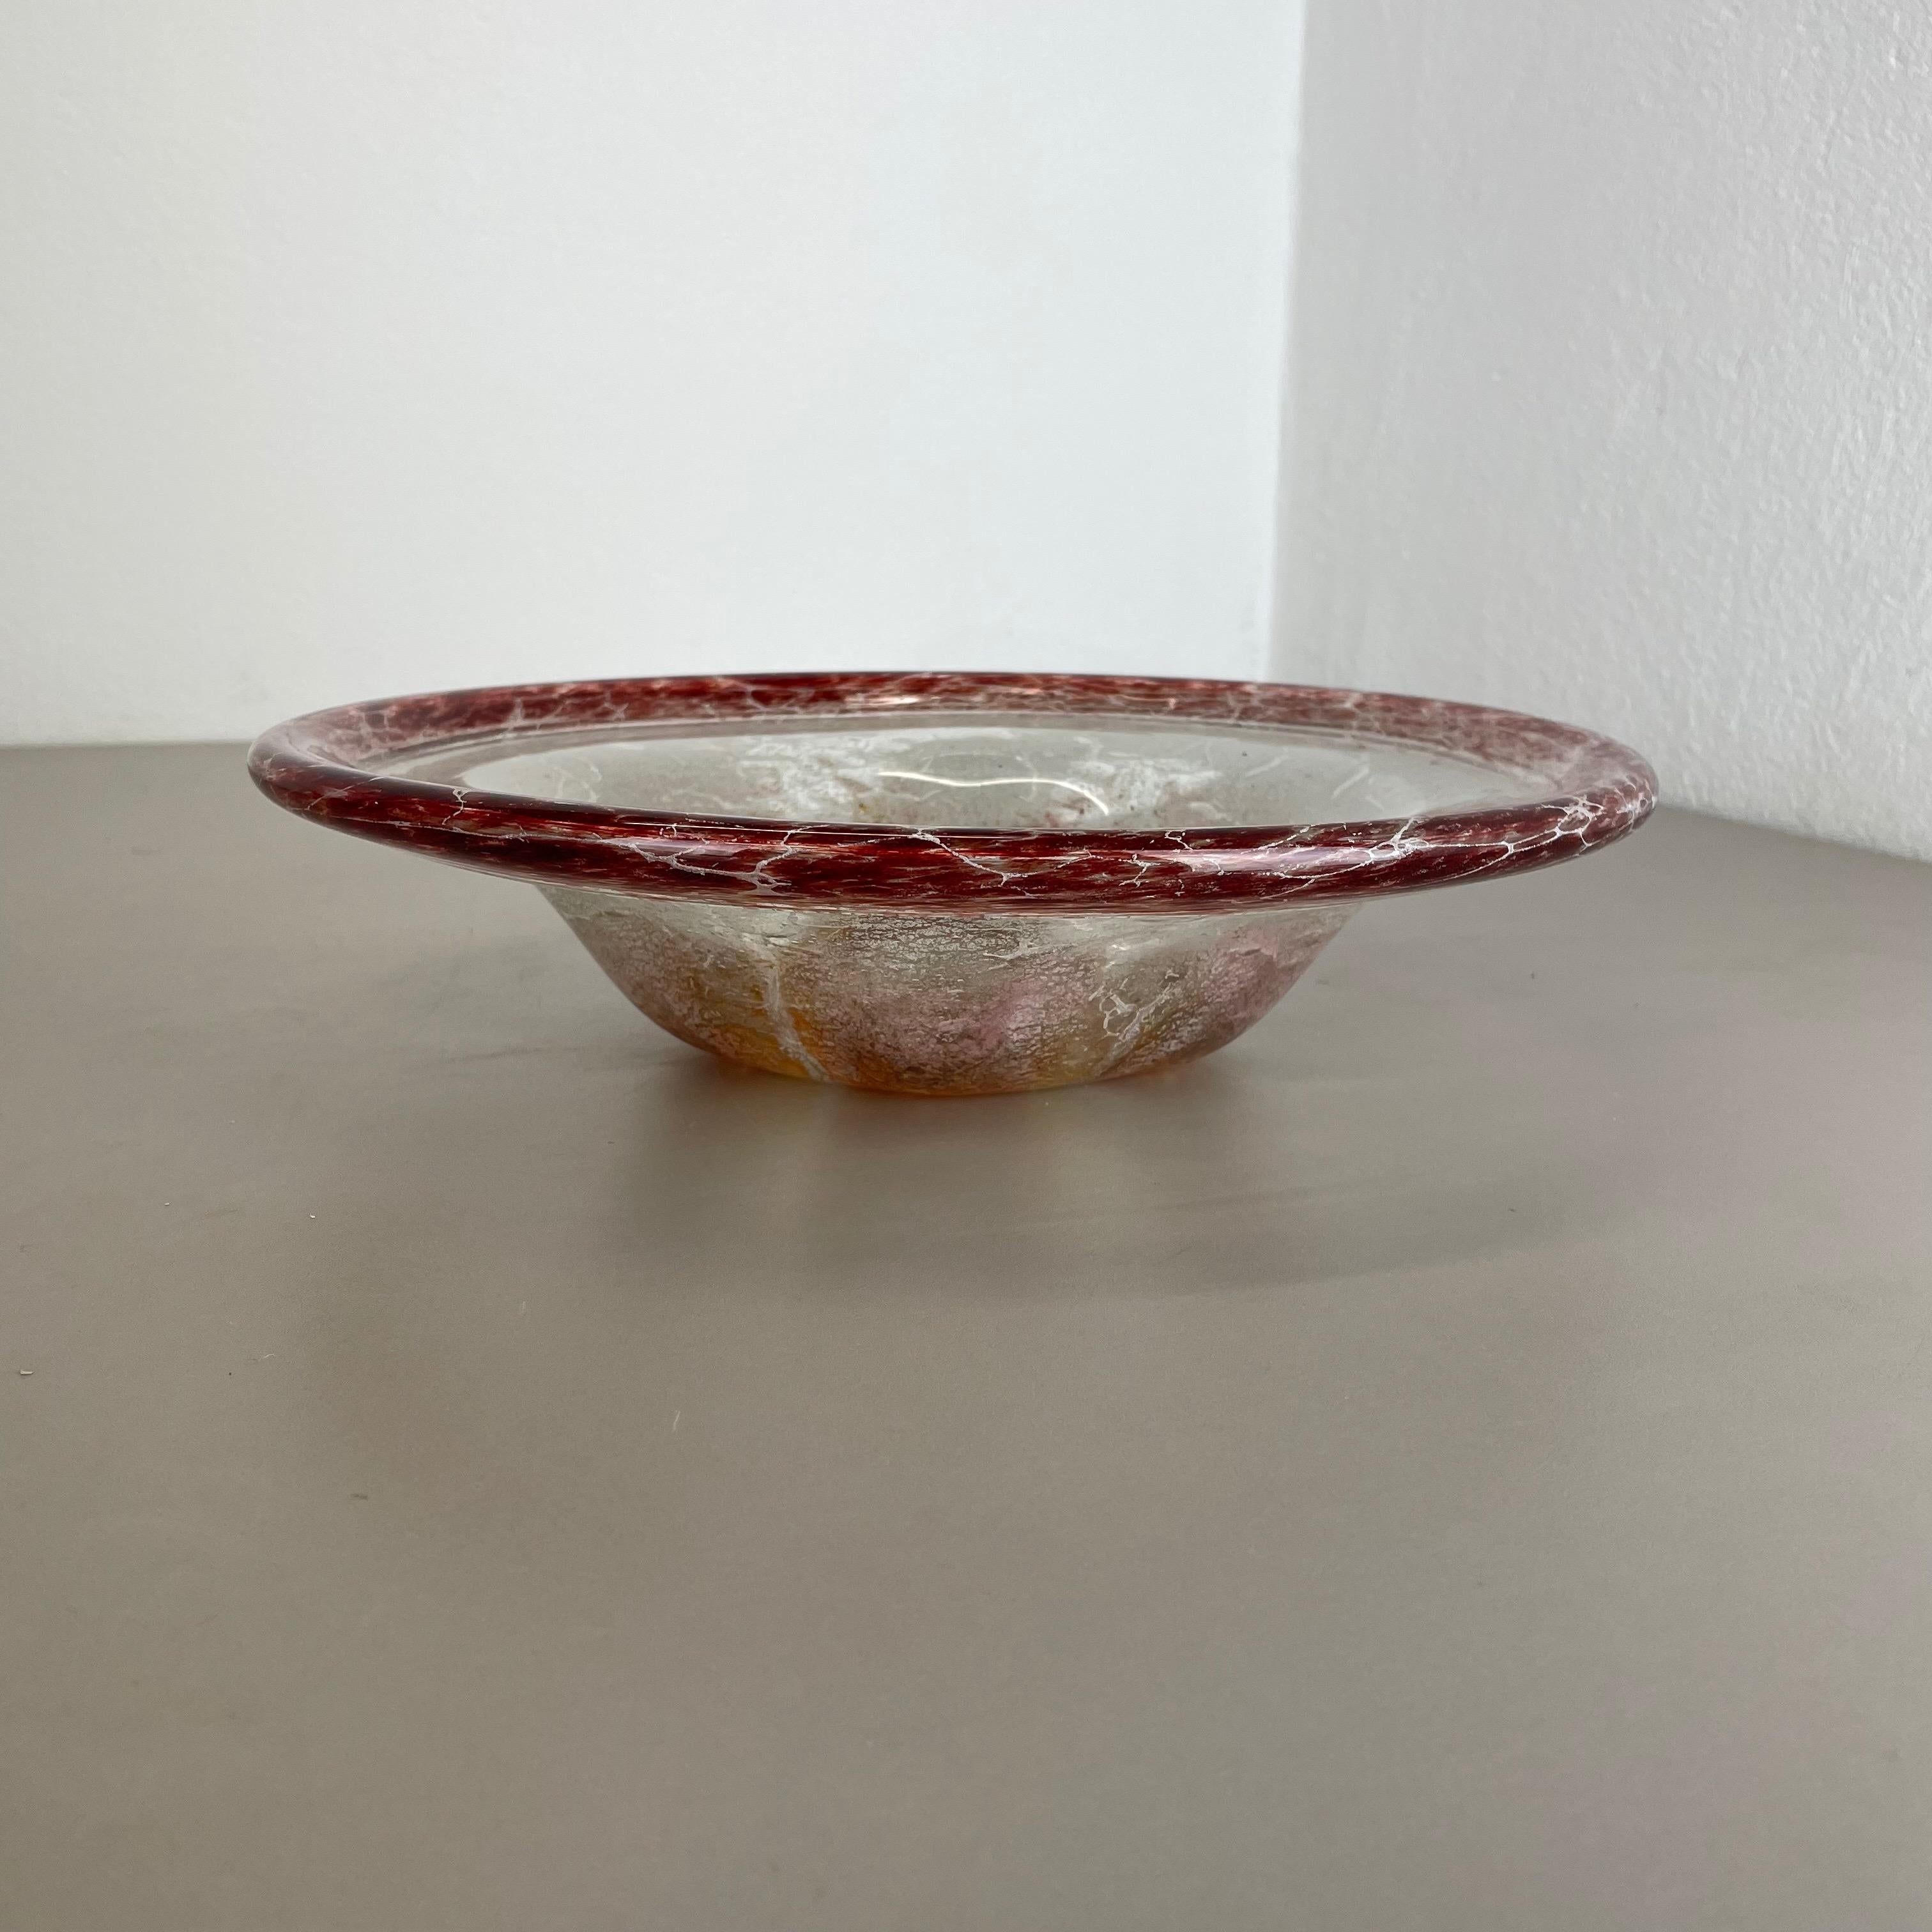 German Red Glass Bowl by Karl Wiedmann for WMF Ikora, 1930s Baushaus Art Deco In Good Condition For Sale In Kirchlengern, DE